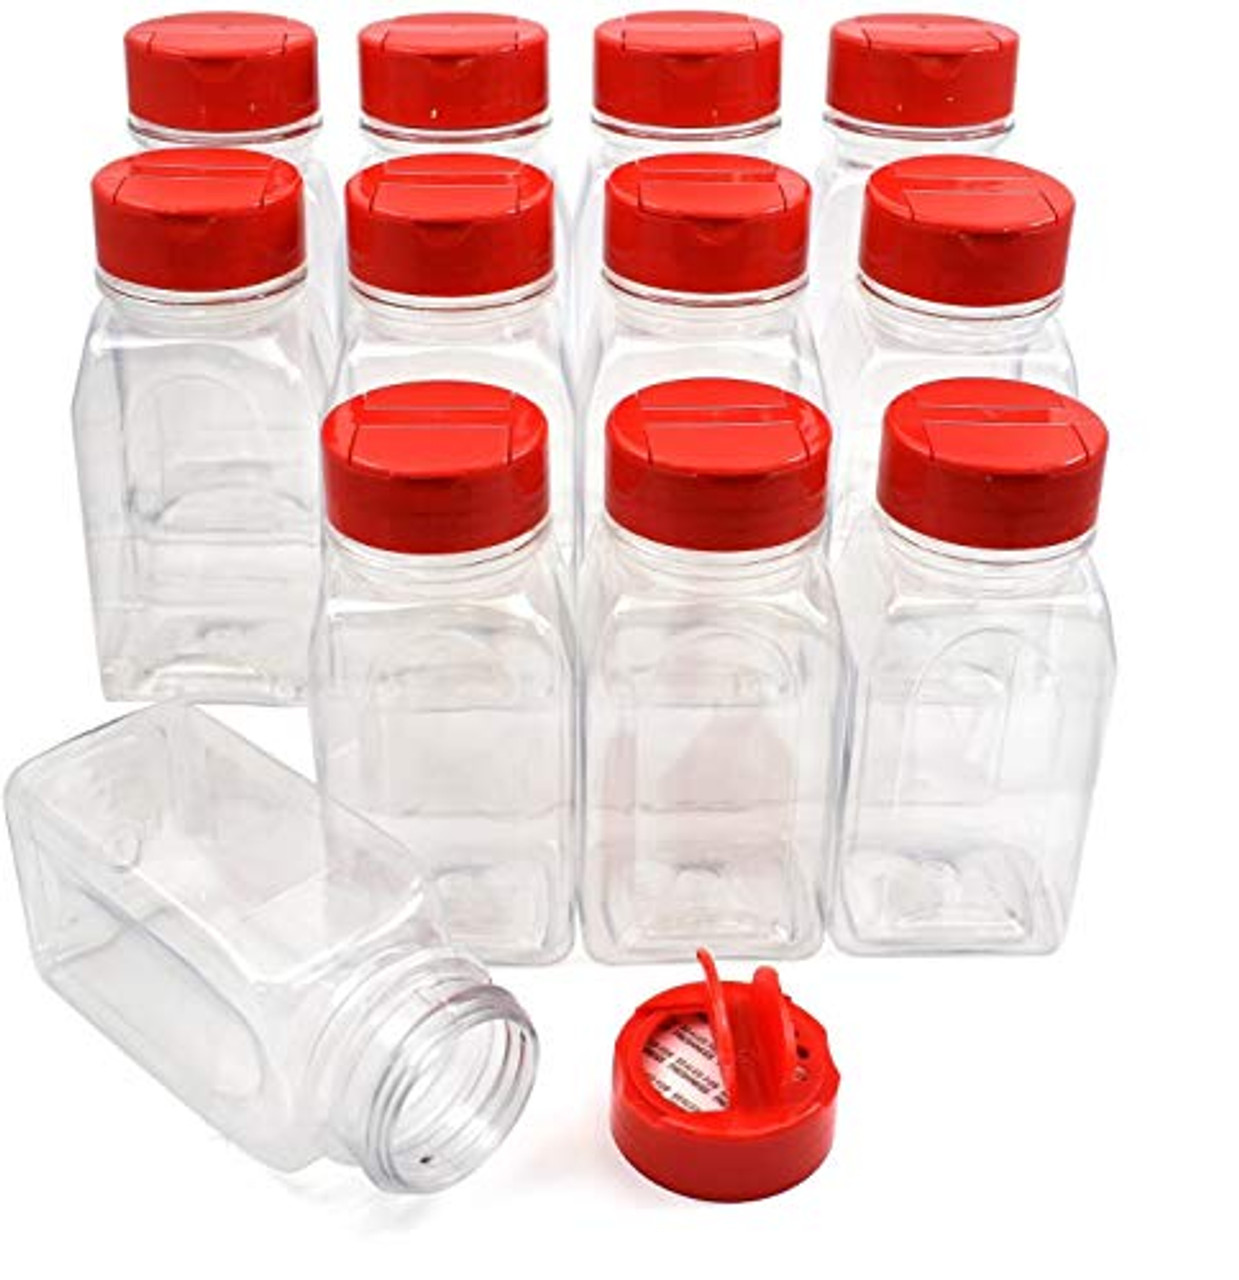 ROYALHOUSE - 6 PACK - 32 Oz with Black Cap - Spice Jars Bottles Containers  ? Perfect for Storing Herbs and Powders ? Lined Cap - Safe Plastic ? PET 